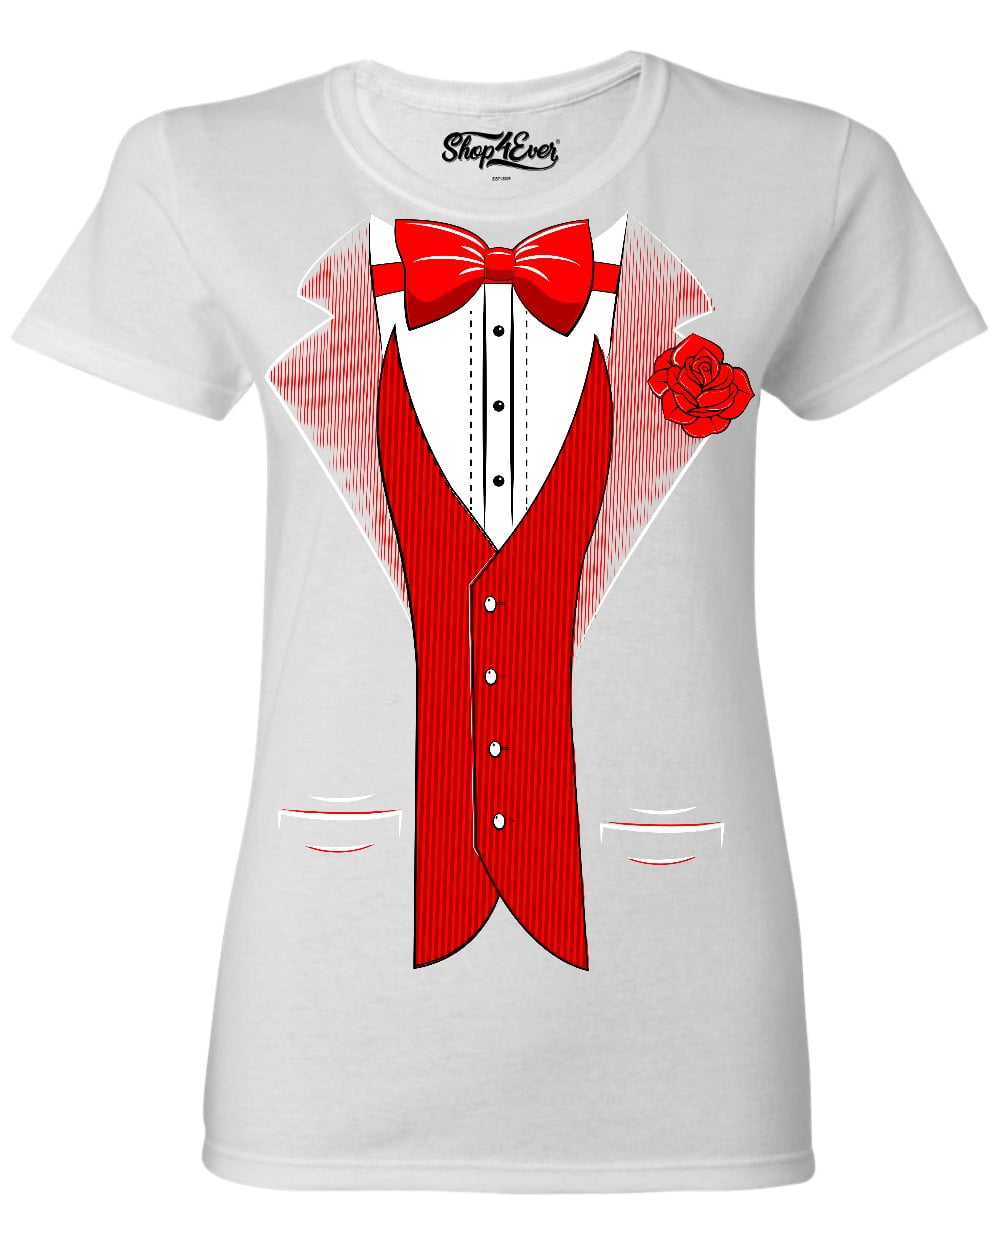 shop4ever Classic Tuxedo with Red Rose Long Sleeve Shirt Party Costume Shirt 